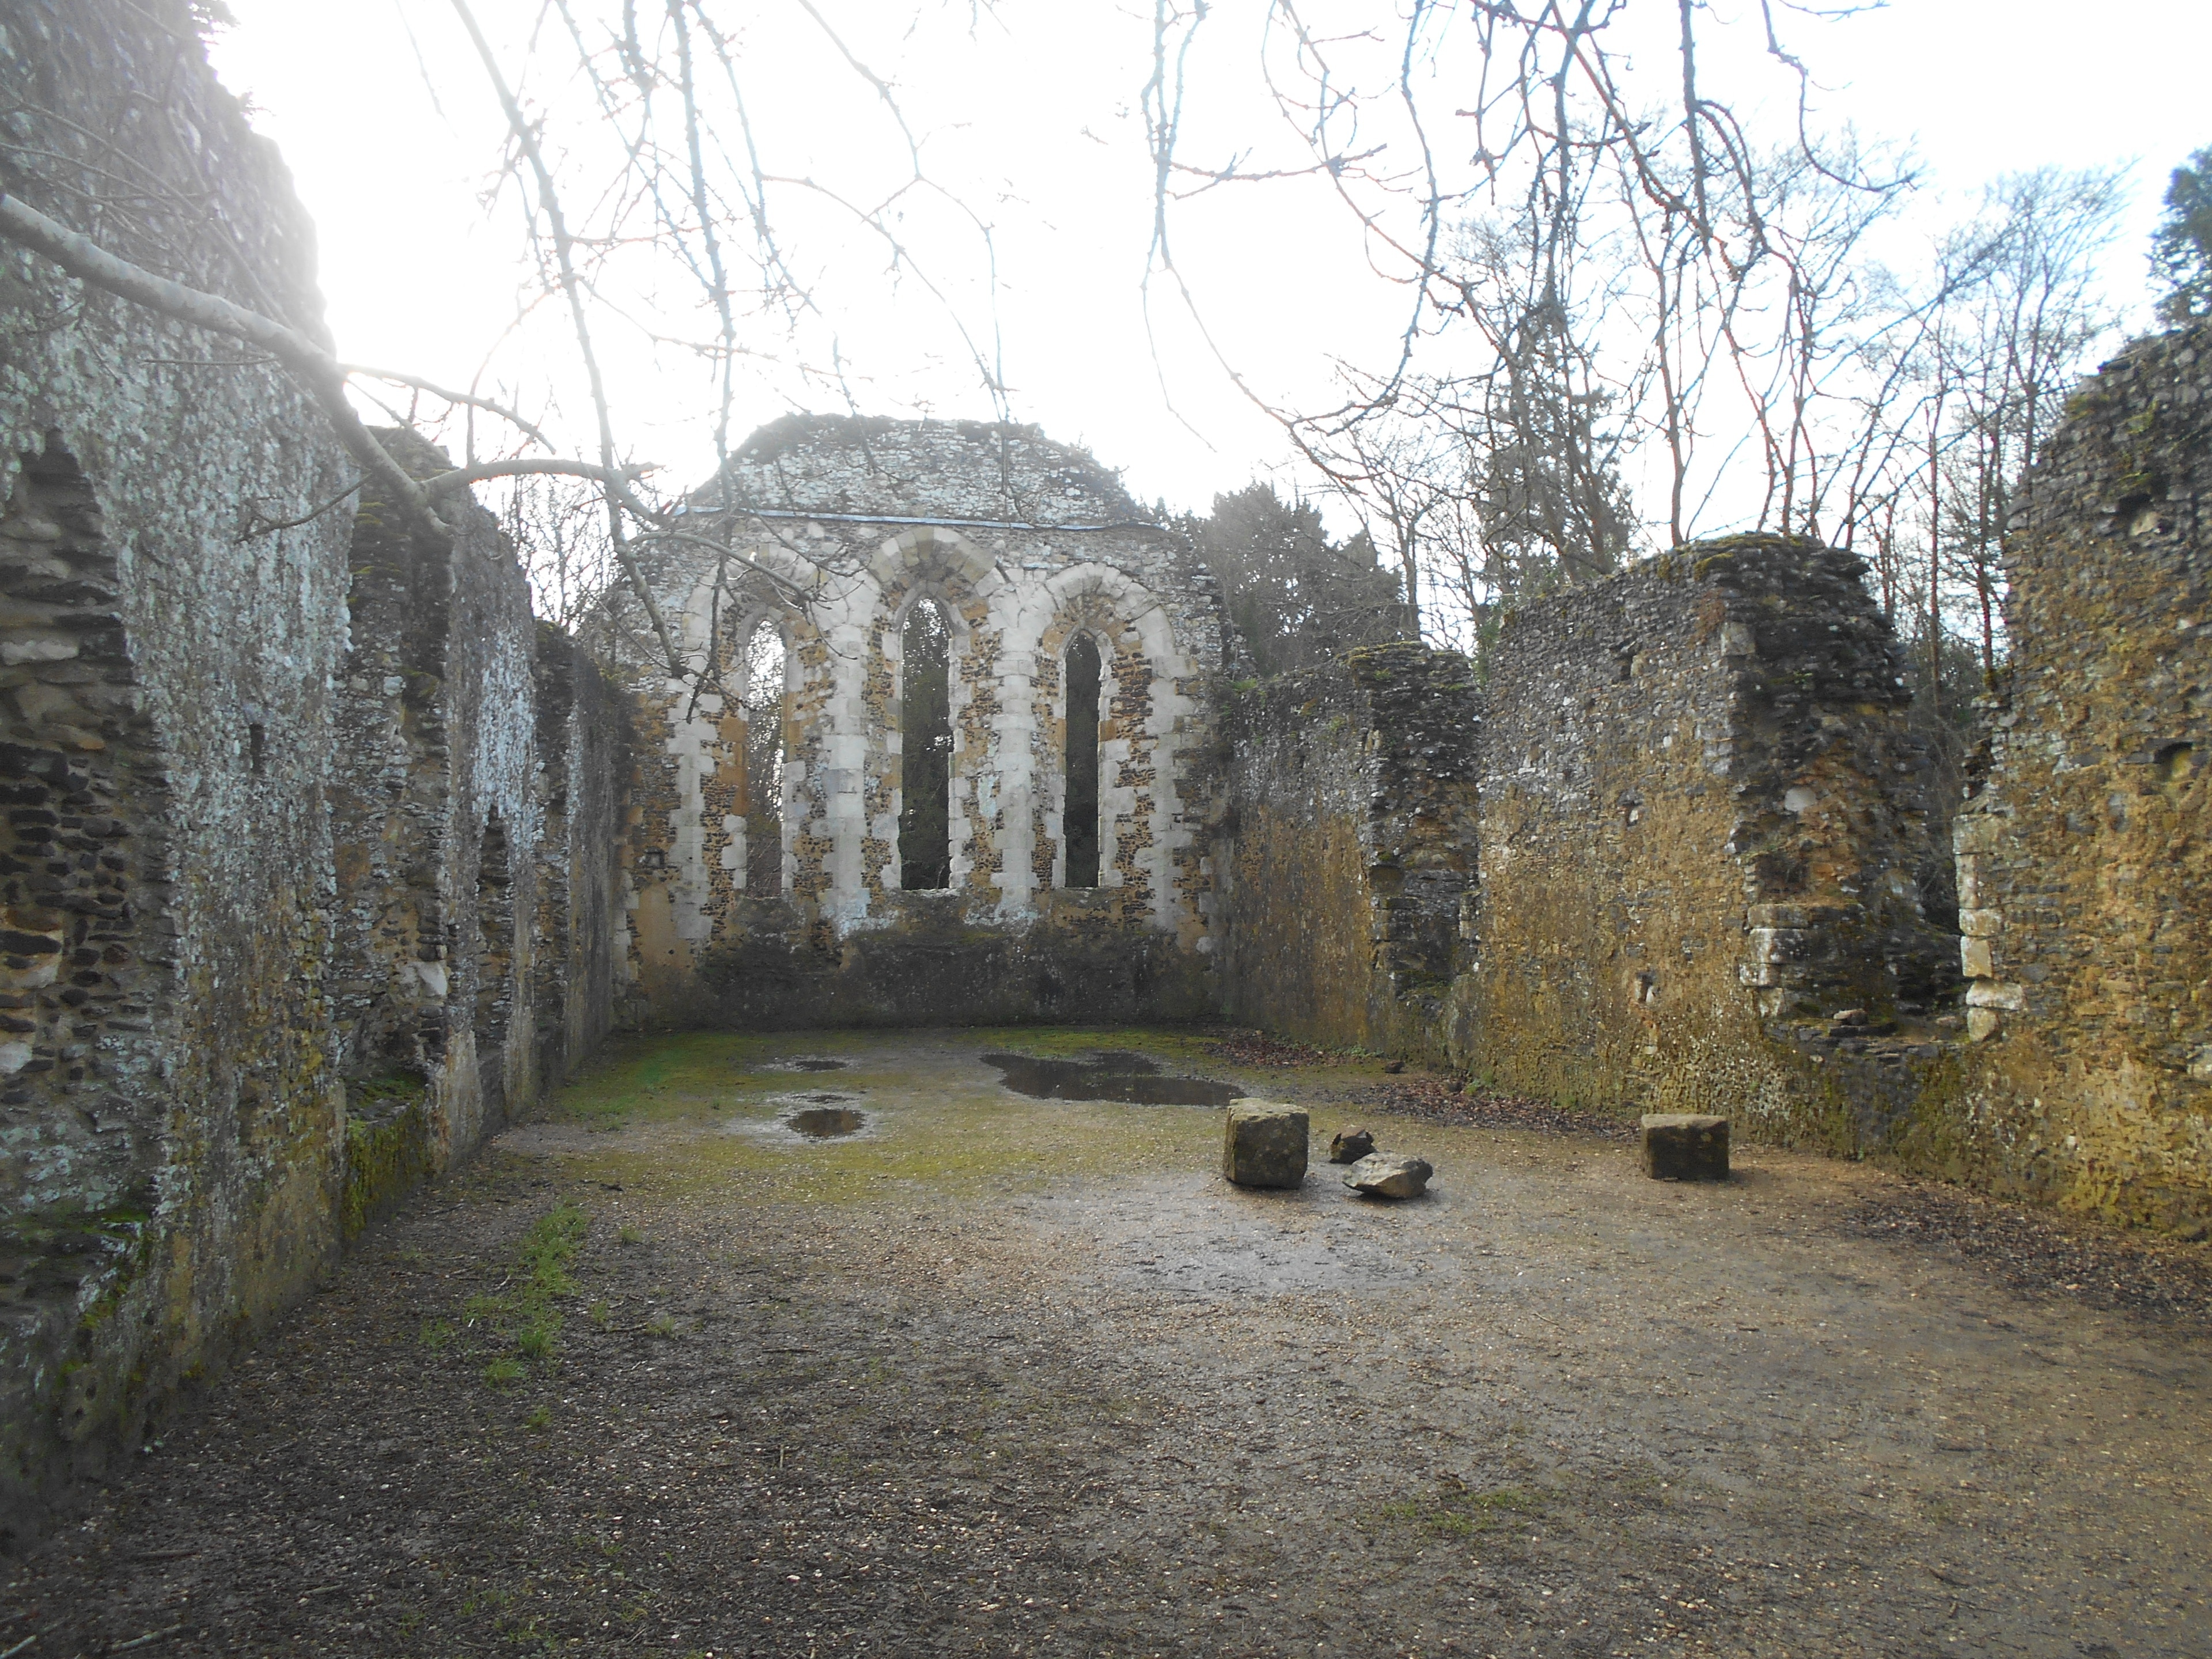 Ruins of Waverley Abbey, a Cistercian abbey founded in 1128 and dissolved in 1536 by King Henry VIII.